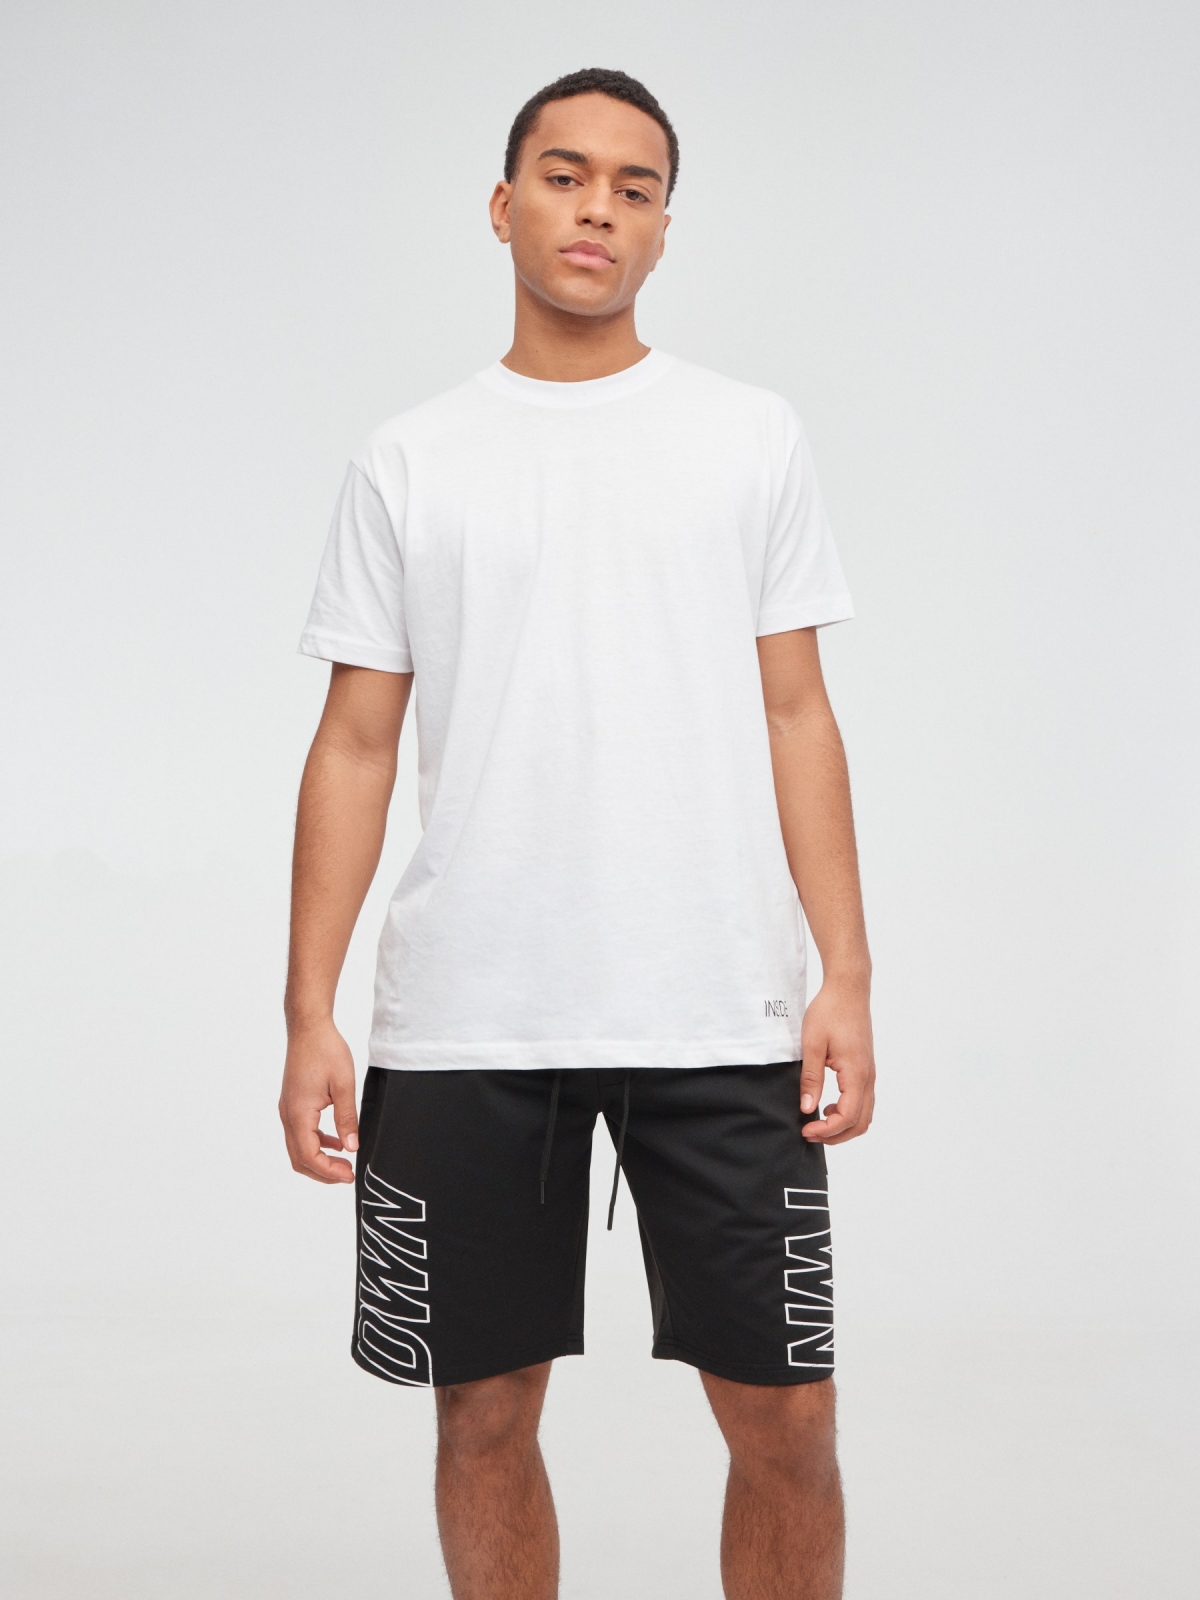 Jogger shorts text black middle front view